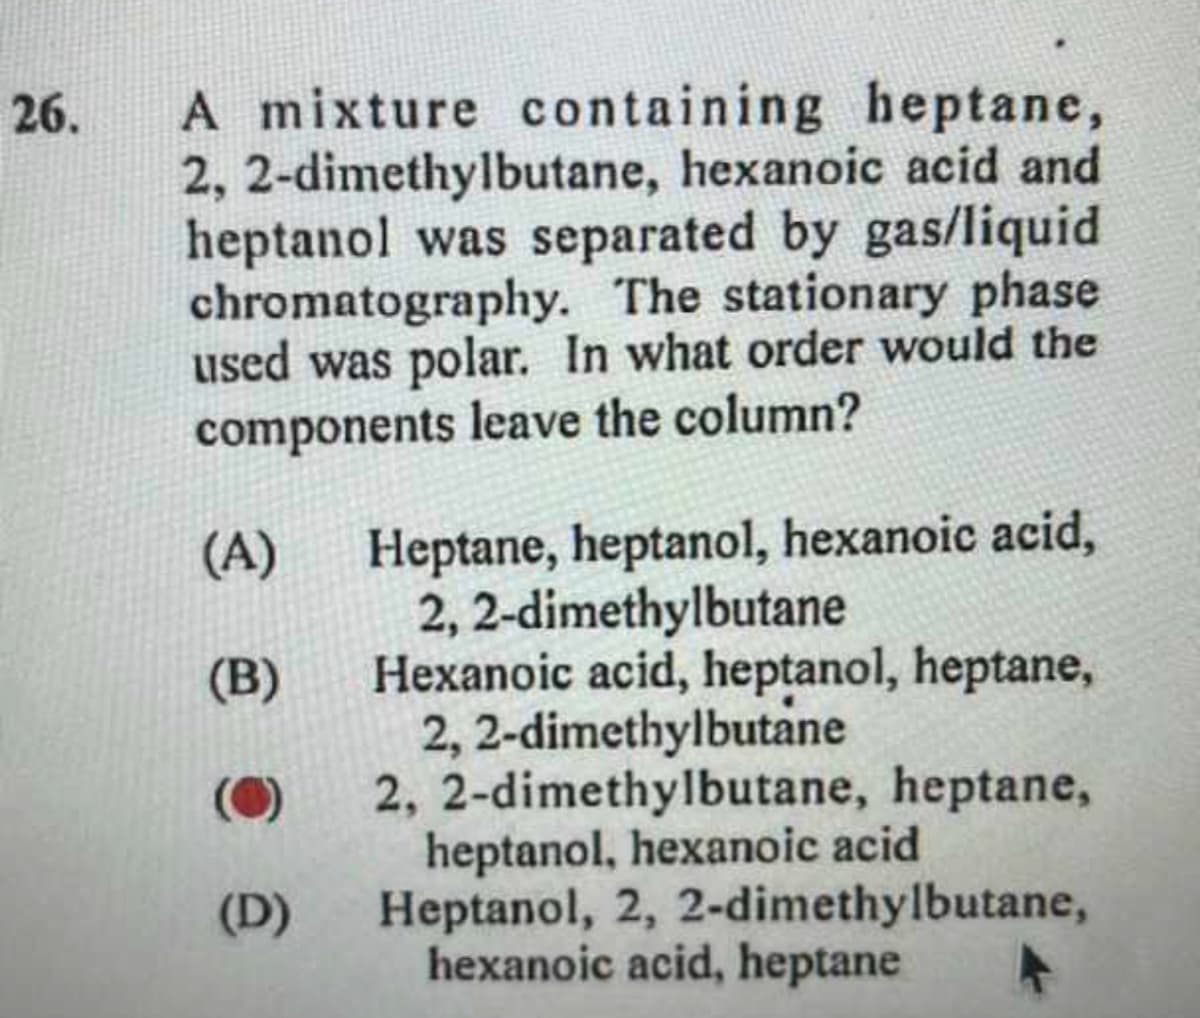 26.
A mixture containing heptane,
2,2-dimethylbutane, hexanoic acid and
heptanol was separated by gas/liquid
chromatography. The stationary phase
used was polar. In what order would the
components leave the column?
(A)
(B)
(D)
Heptane, heptanol, hexanoic acid,
2,2-dimethylbutane
Hexanoic acid, heptanol, heptane,
2,2-dimethylbutane
2, 2-dimethylbutane, heptane,
heptanol, hexanoic acid
Heptanol, 2, 2-dimethylbutane,
hexanoic acid, heptane